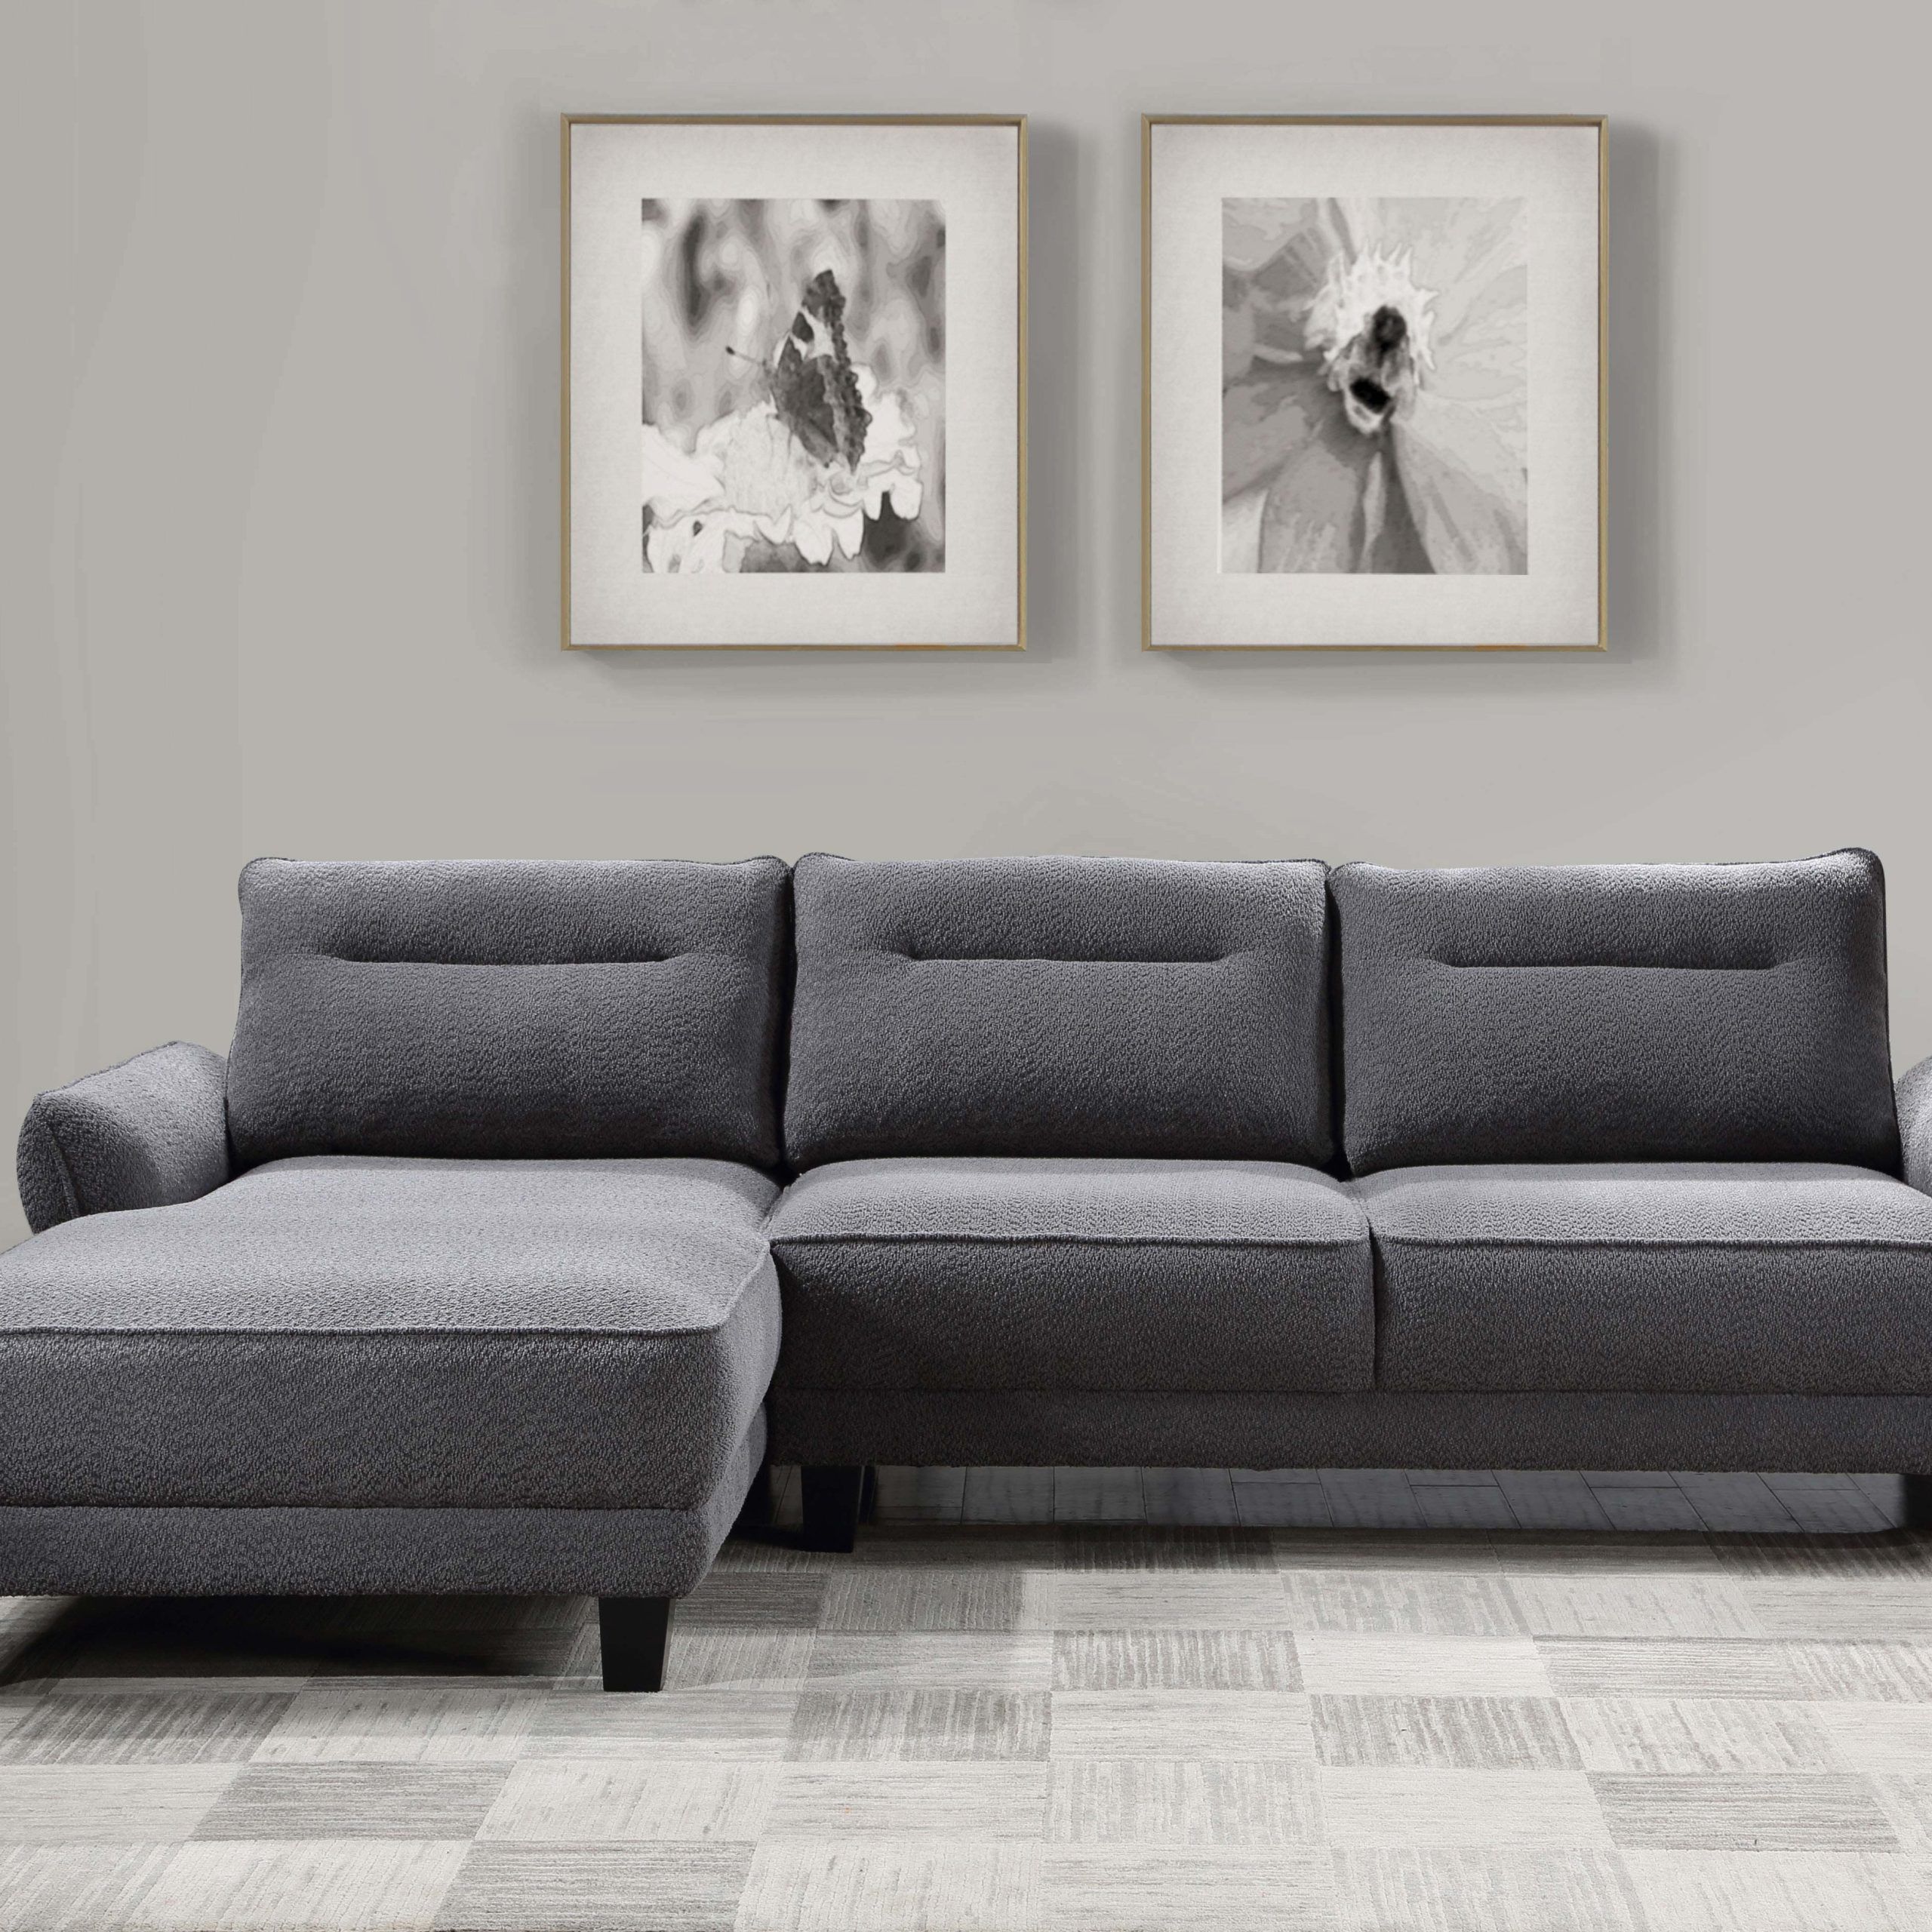 Caspian Upholstered Curved Arms Sectional Sofa Grey – Coaste For Sofas With Curved Arms (View 5 of 15)